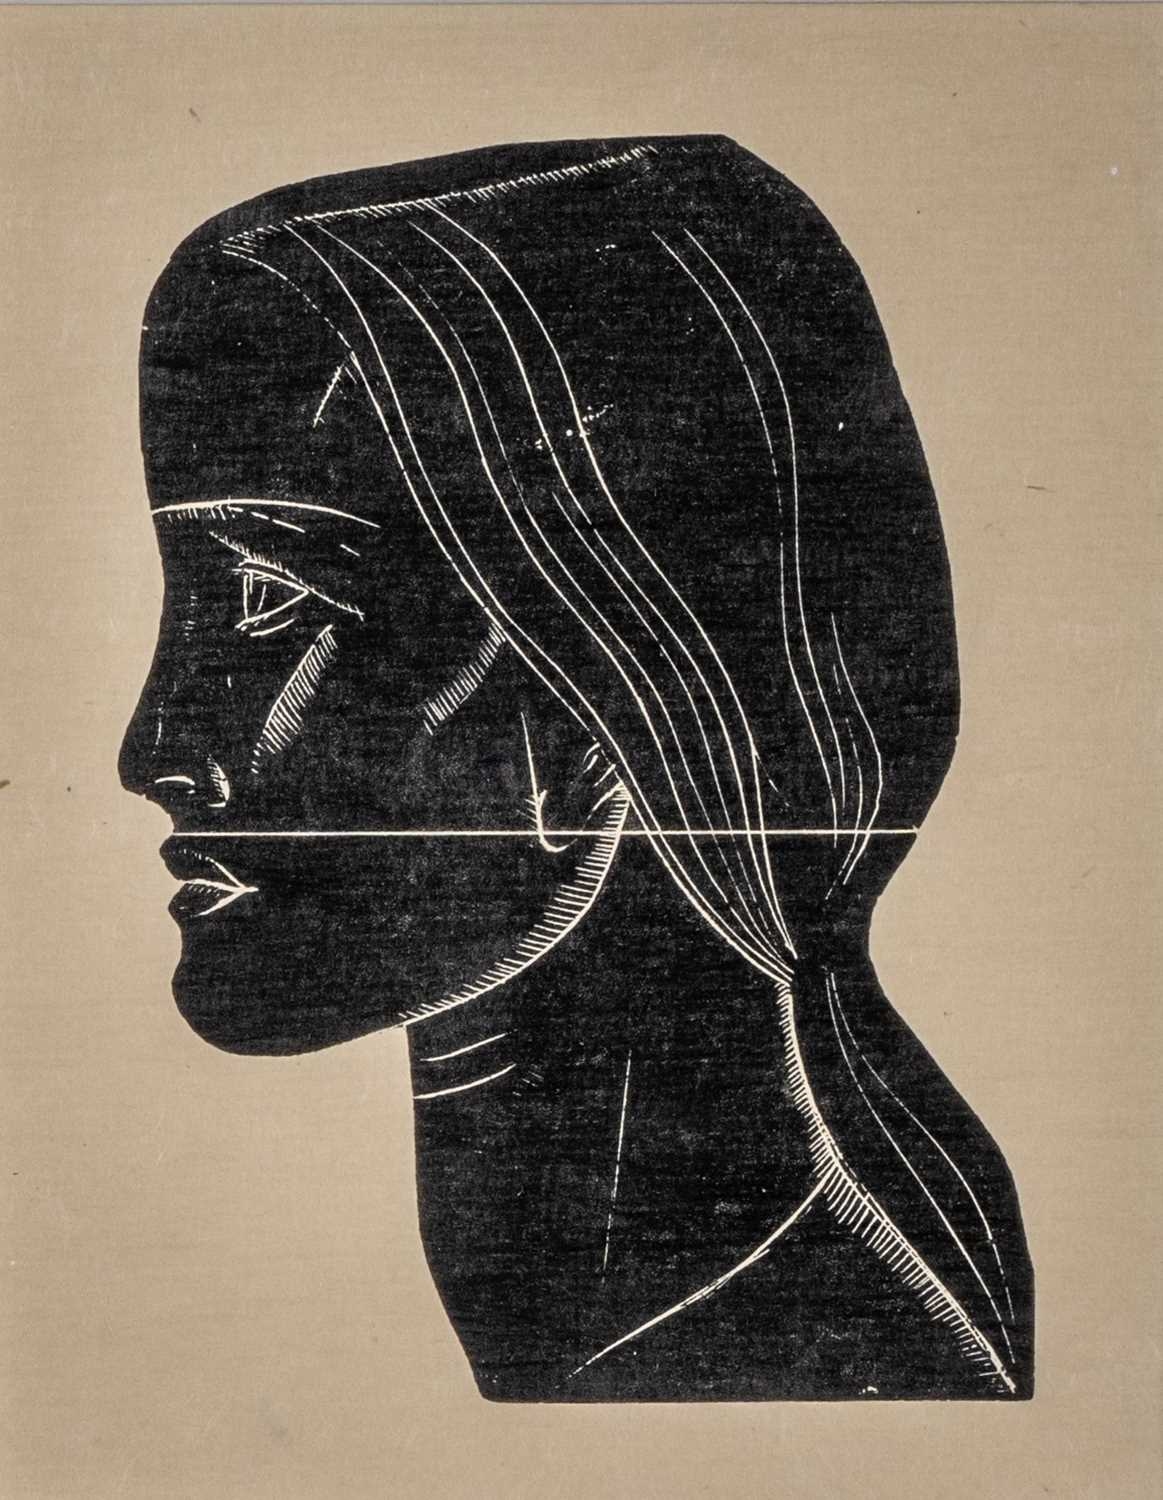 ‡ DAVID JONES 1922 limited edition (75) wood engraving (reprinted 1981 from the original woodblock) - entitled 'Petra' on Martin Tinney Gallery label verso by David Jones, 1922